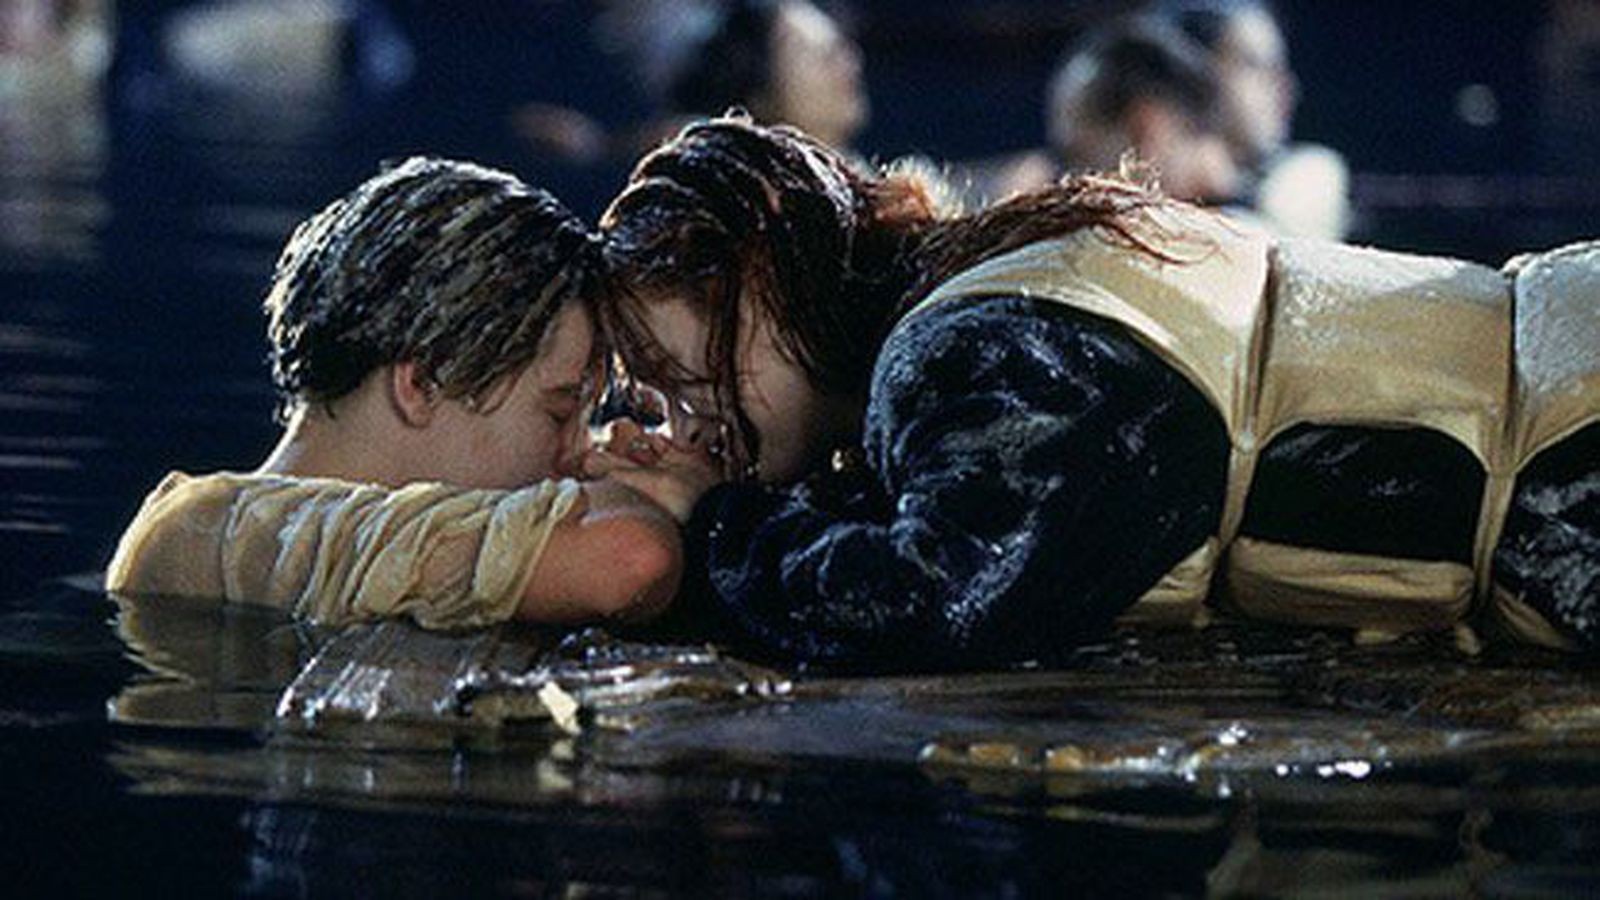 Leonardo DiCaprio and Kate Winslet never fancied each other